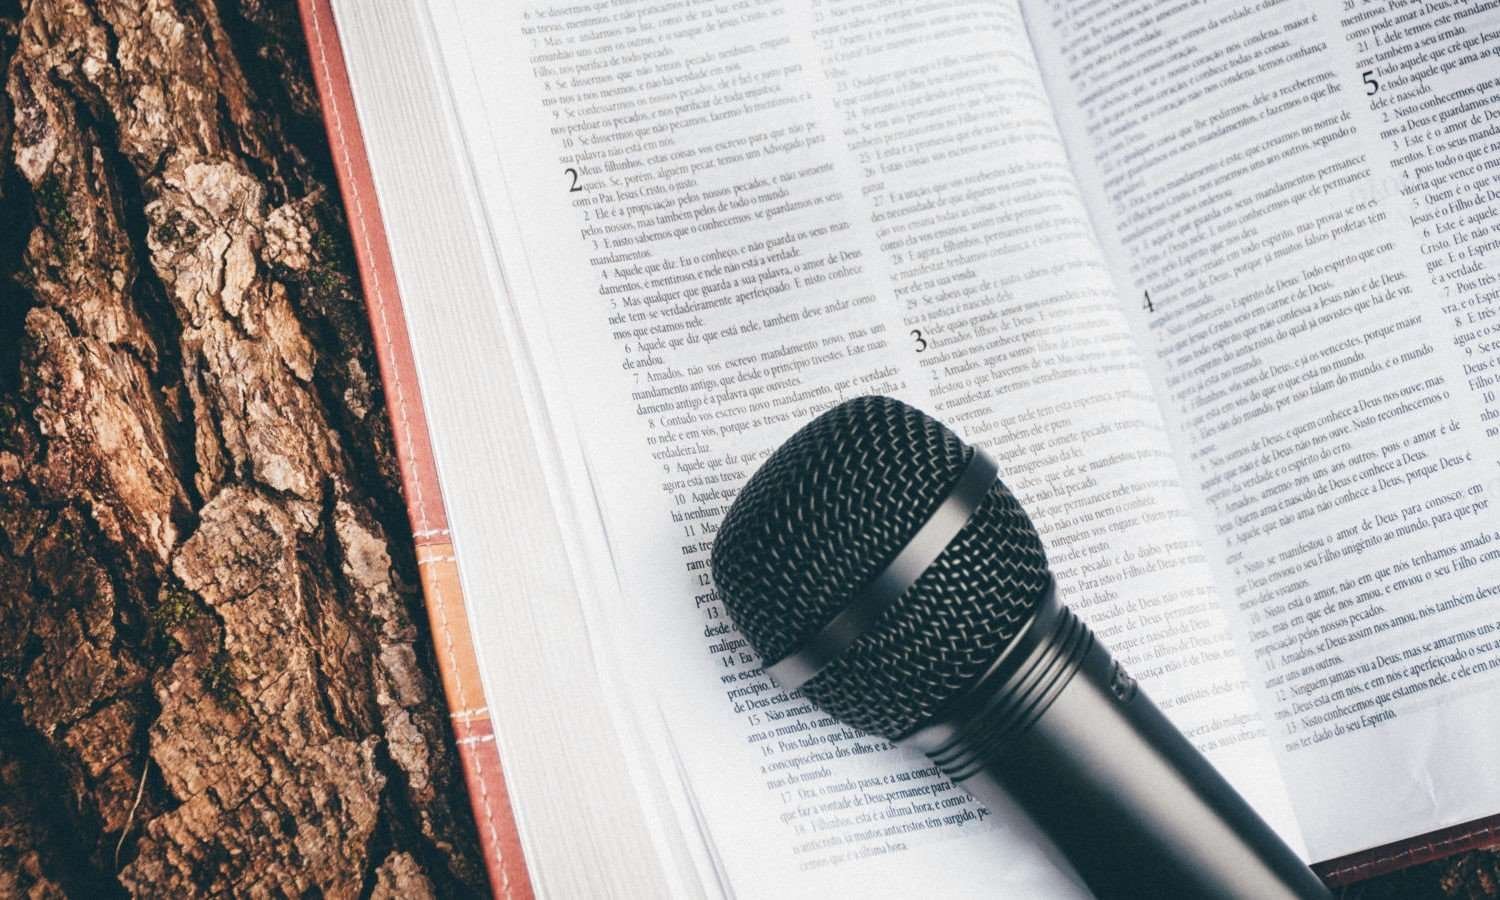 What Is Expository Preaching And Its Necessity?